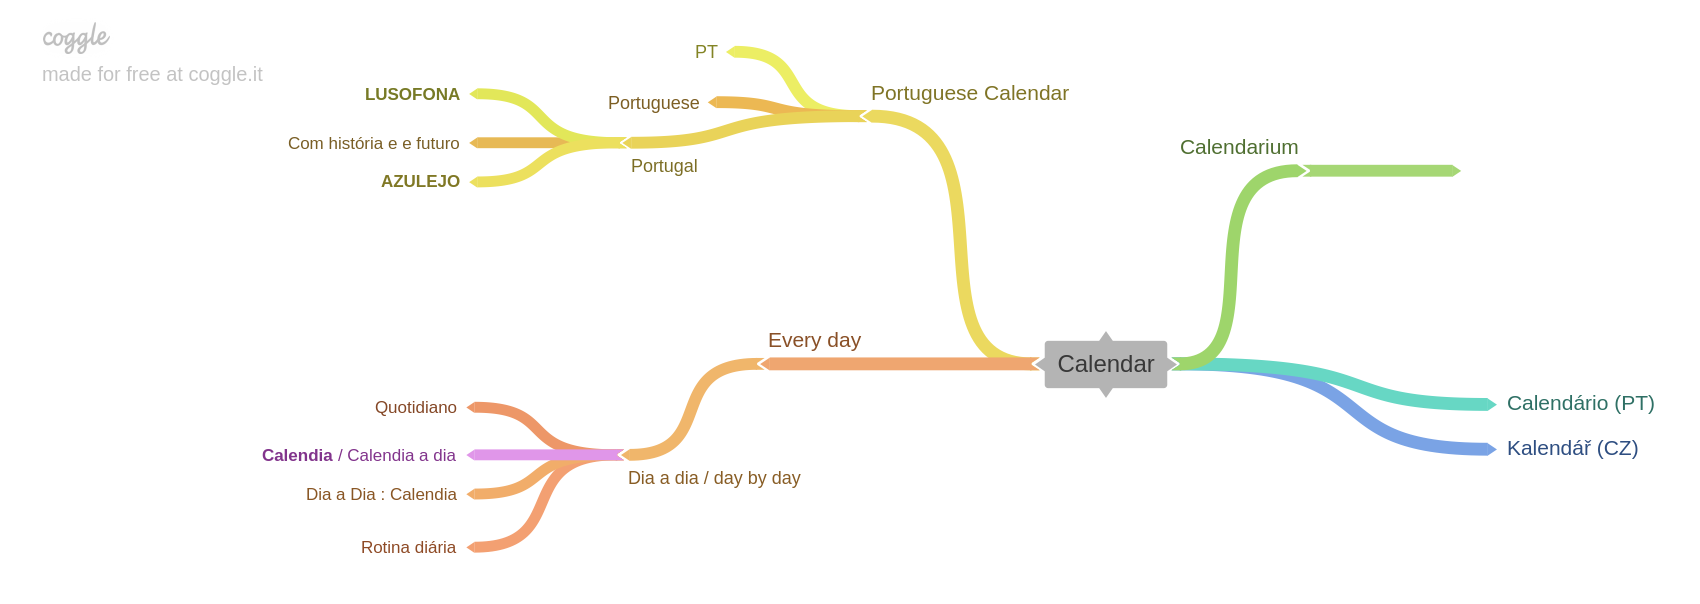 Mindmap from Portucalio using freeware software as a service Coggle